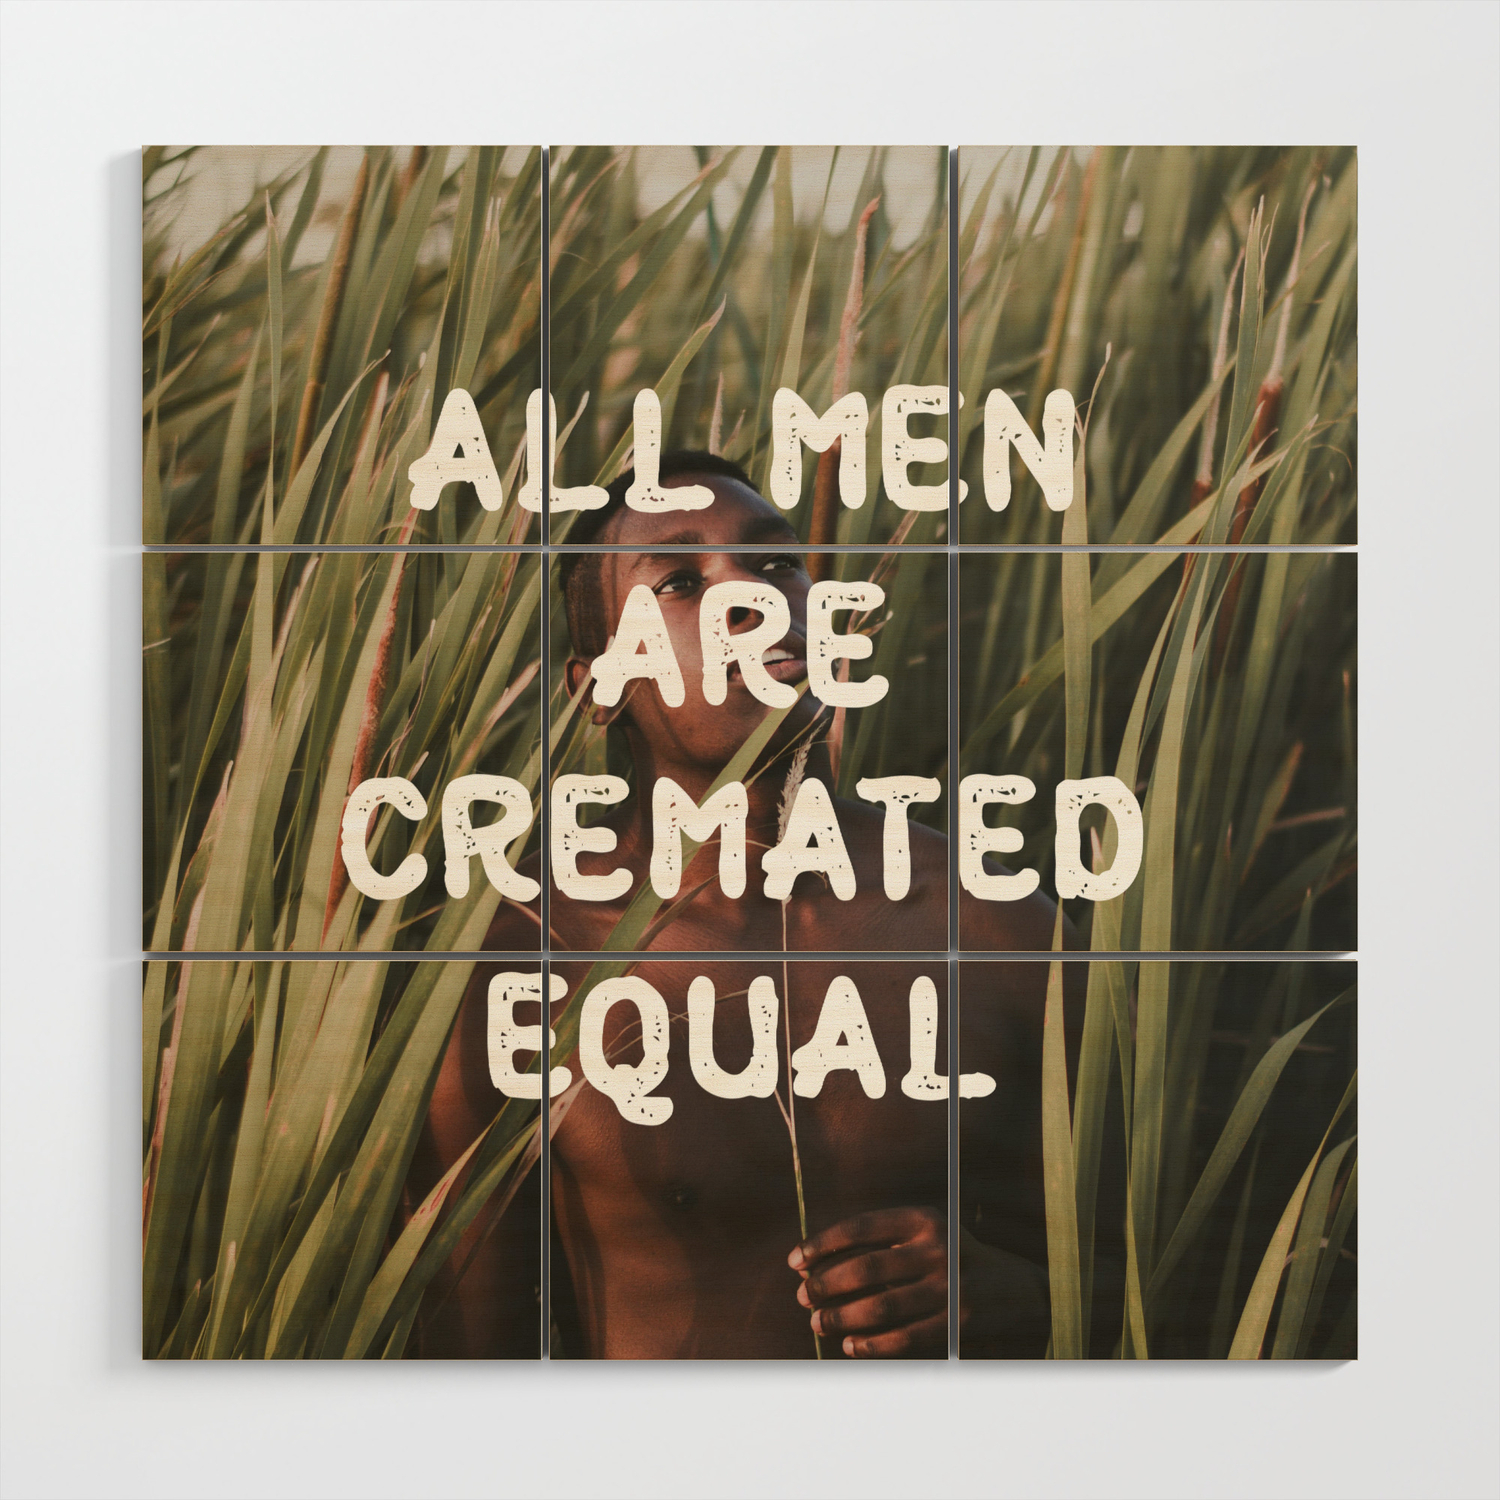 all men are cremated equal home decor 8x5 oval black painted hoop ready to ship gift